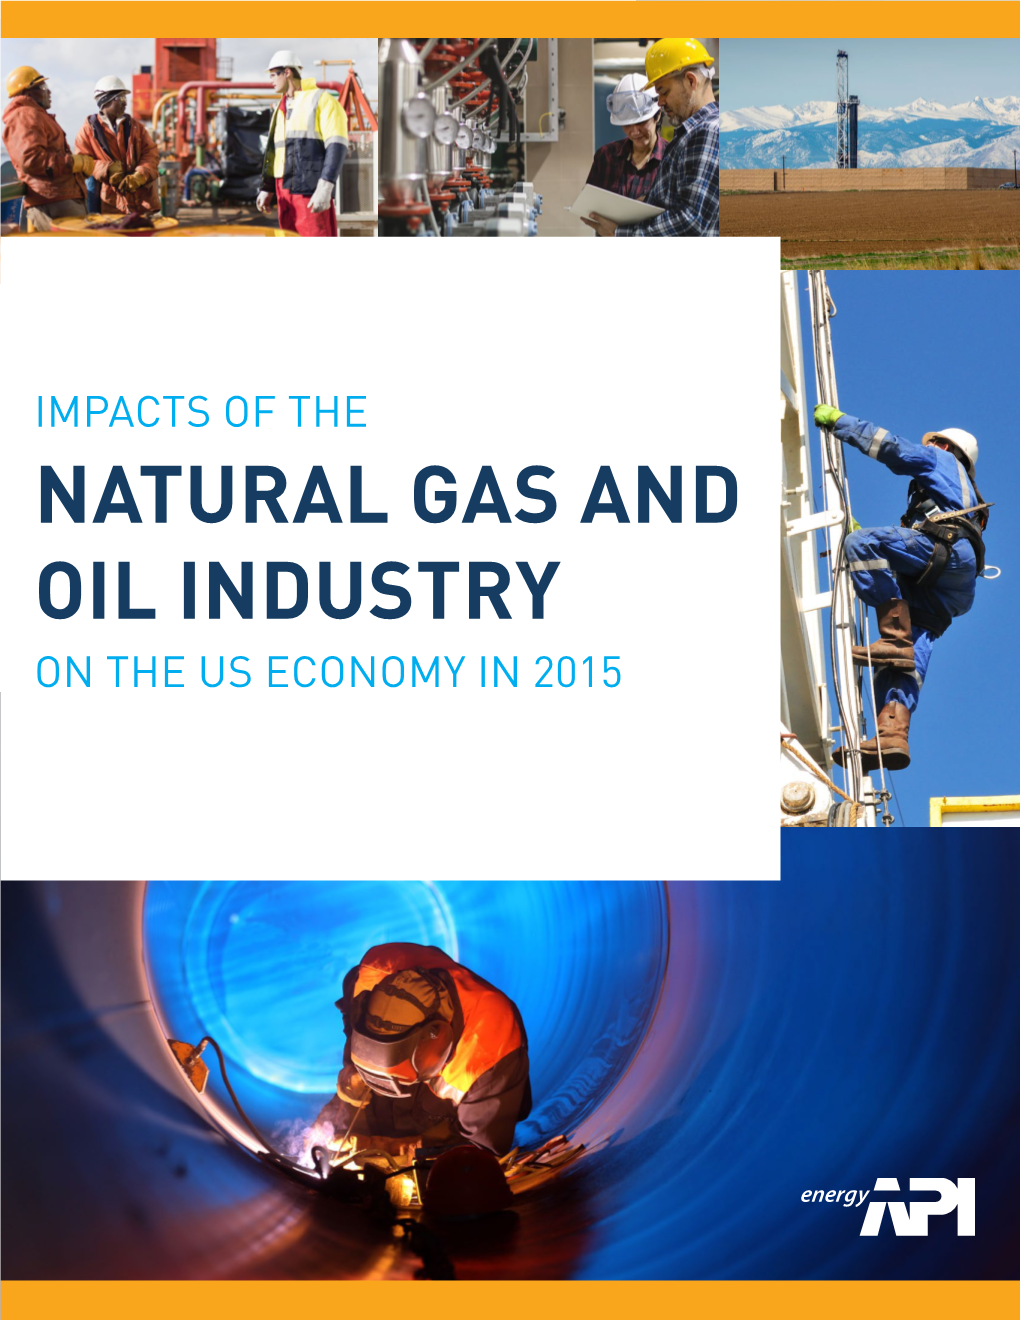 Impacts of the Natural Gas and Oil Industry on the U.S. Economy in 2015